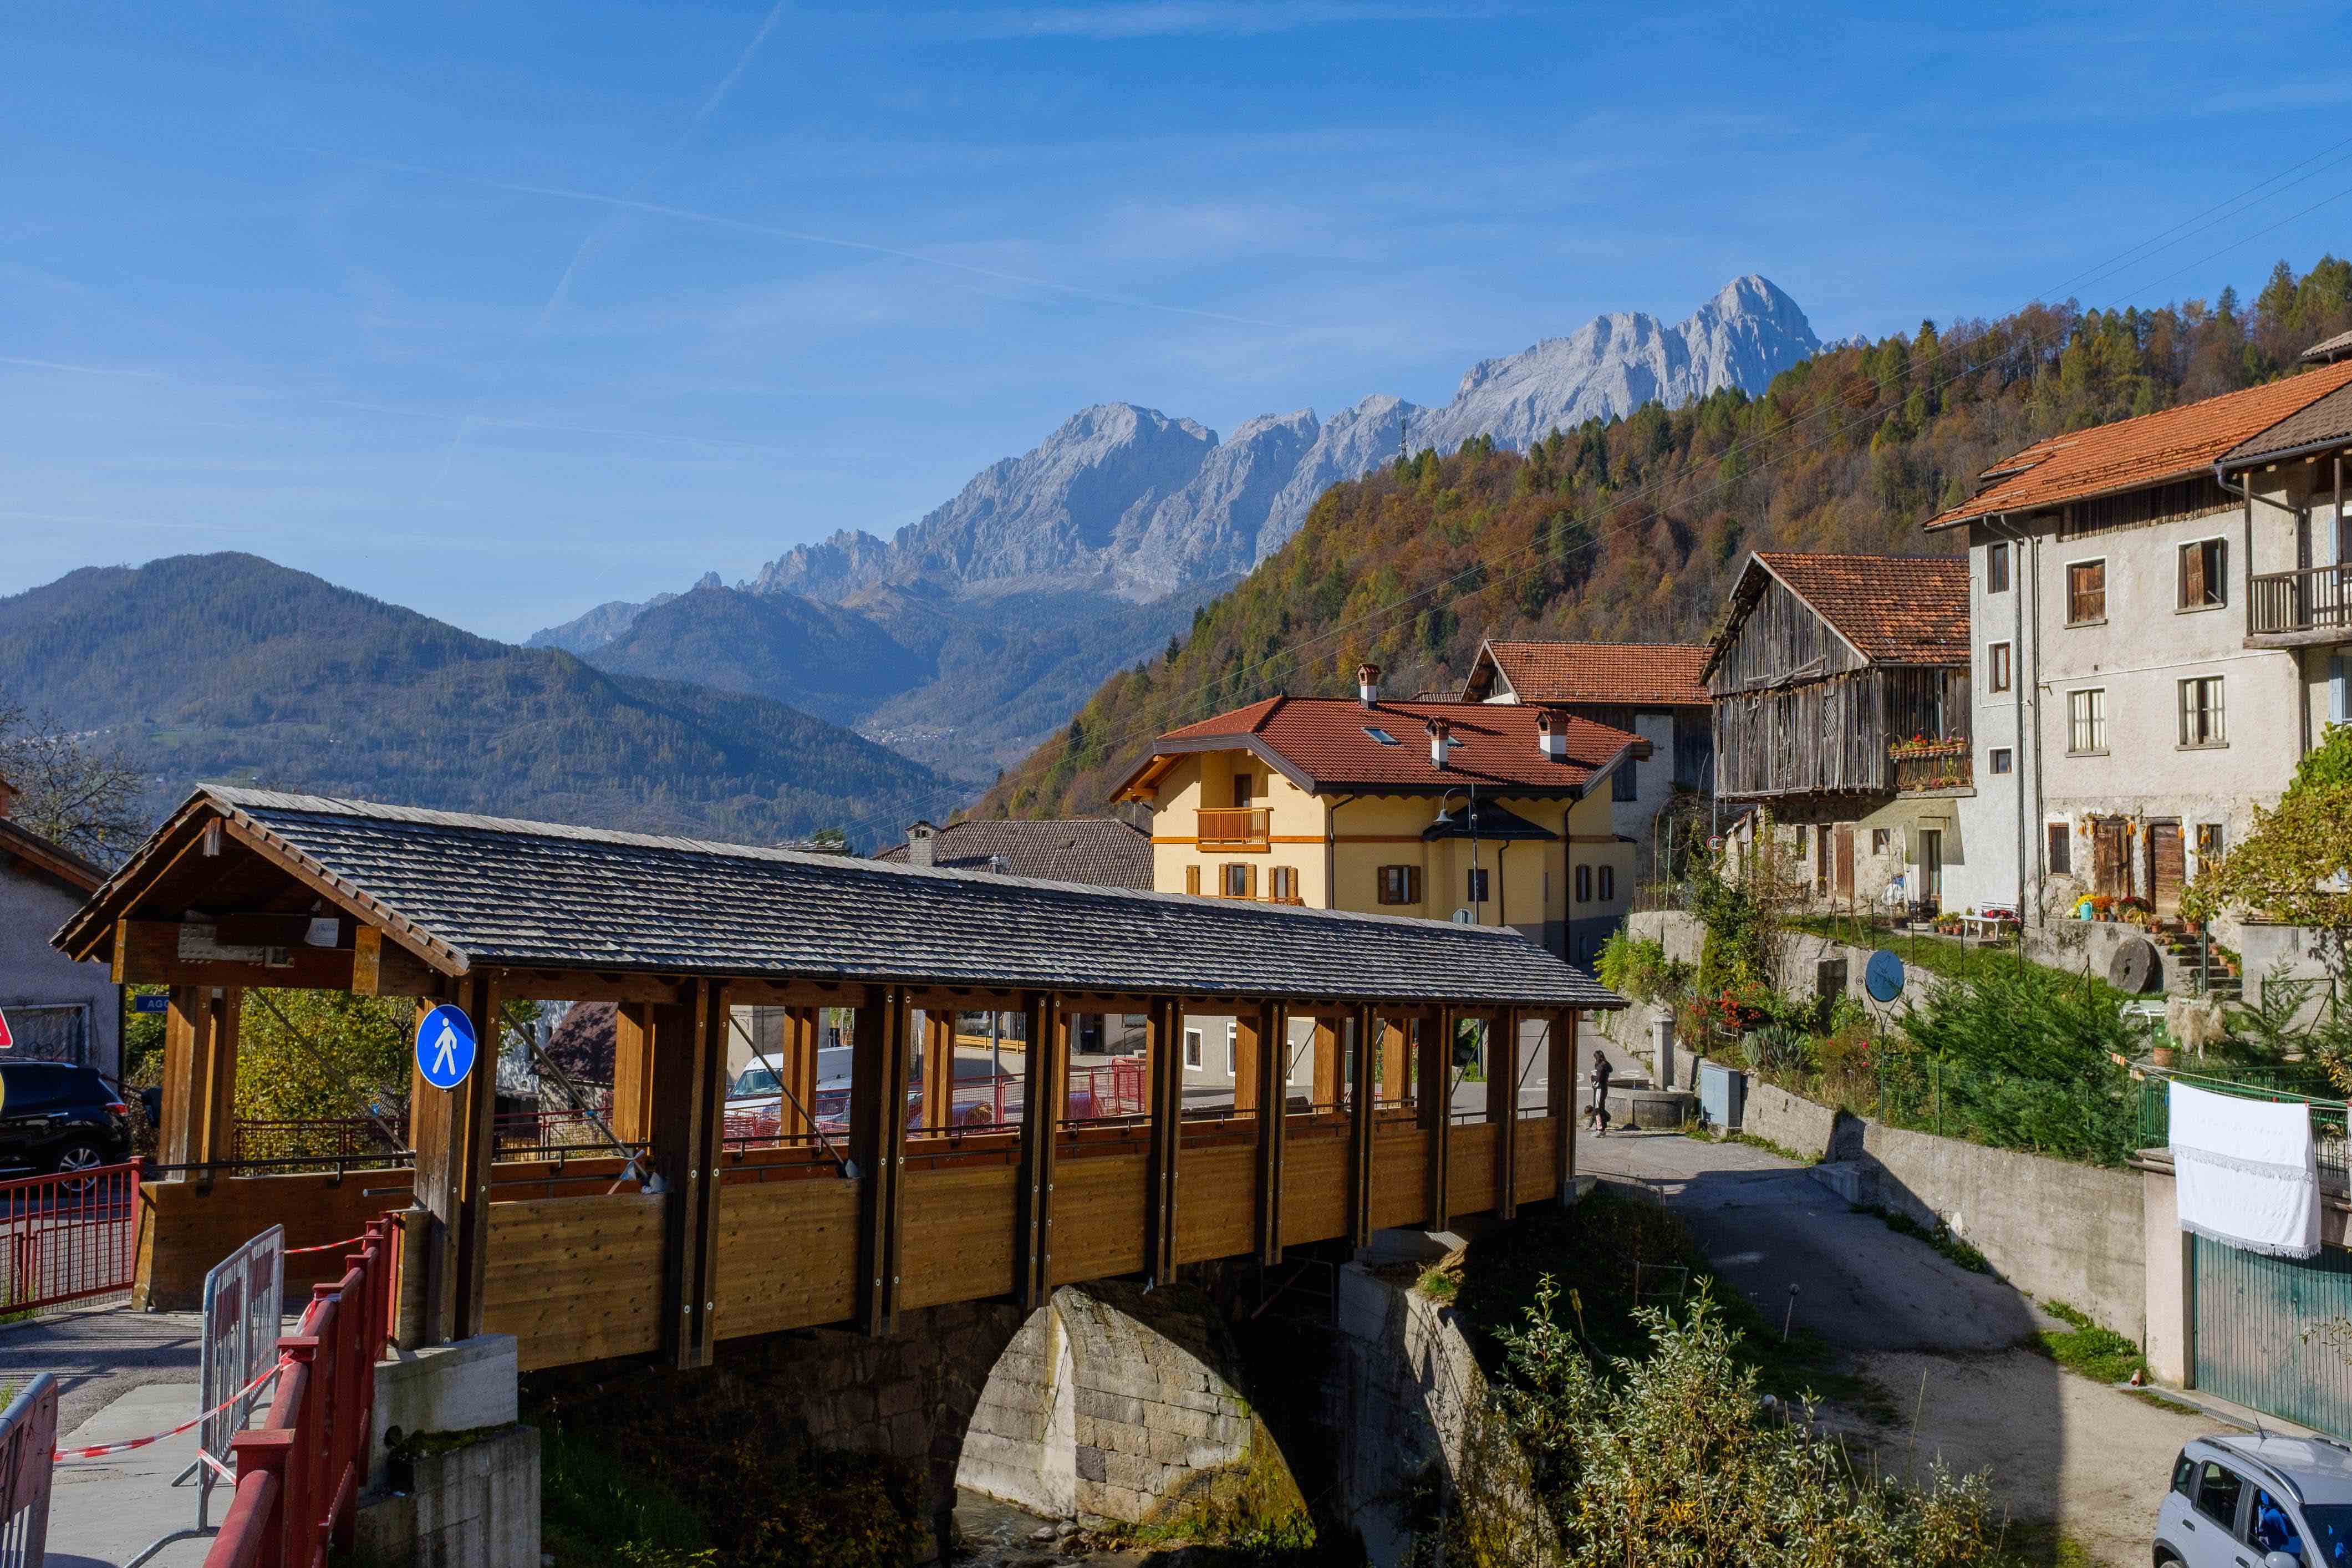 photo of an Italian alpine village along a river with tall mountain peaks behind